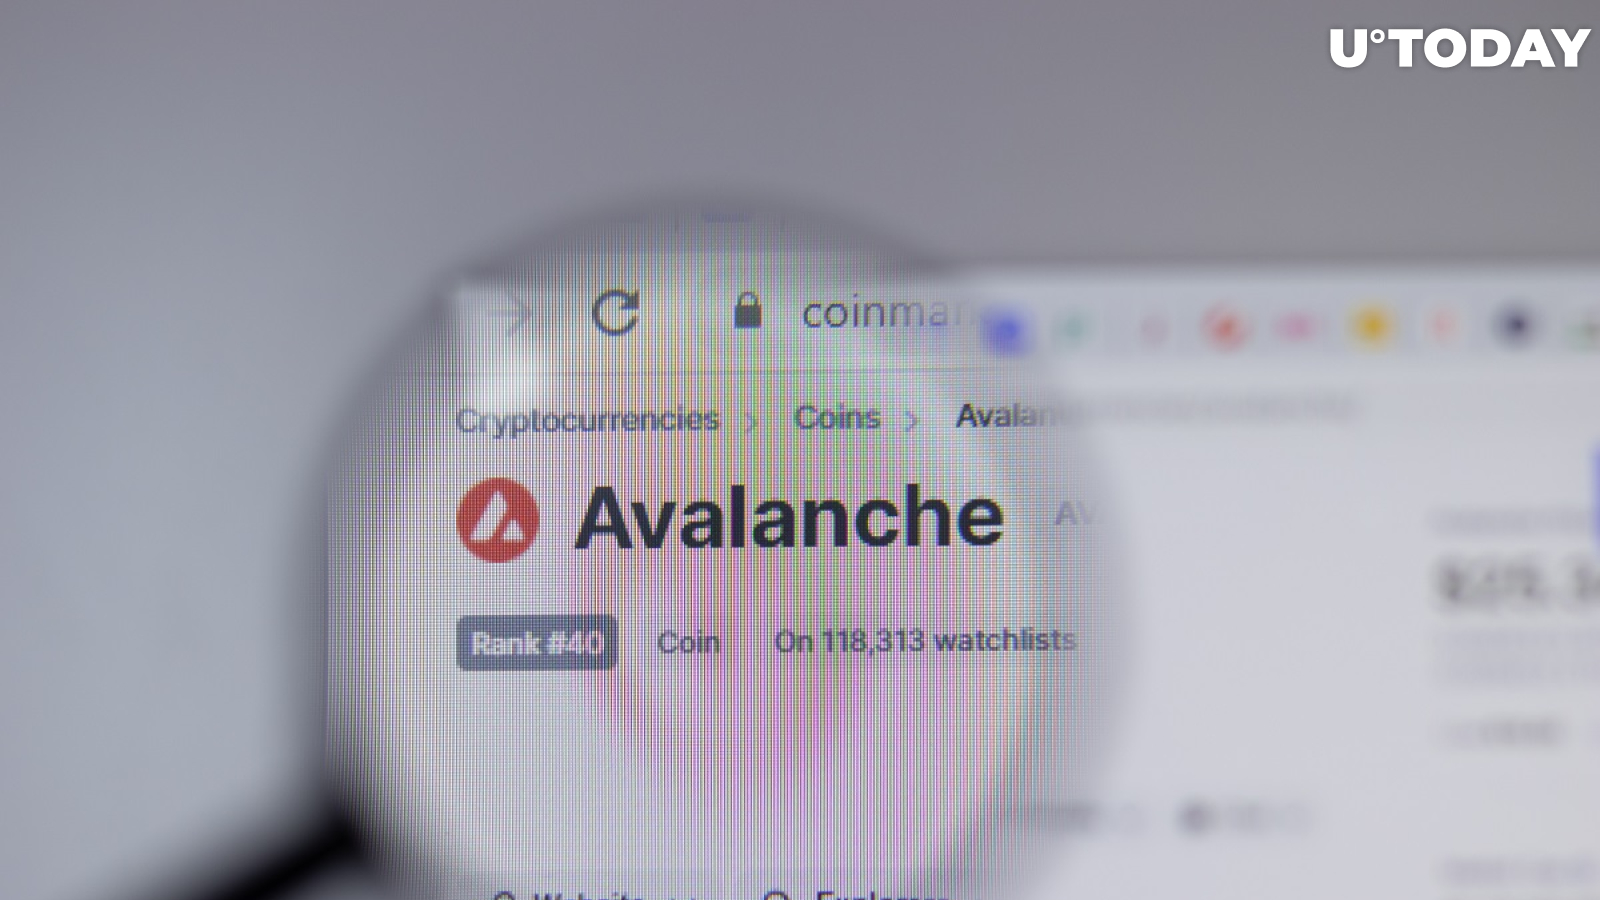 Avalanche (AVAX) to Start Trading on Europe’s Largest Crypto Exchange